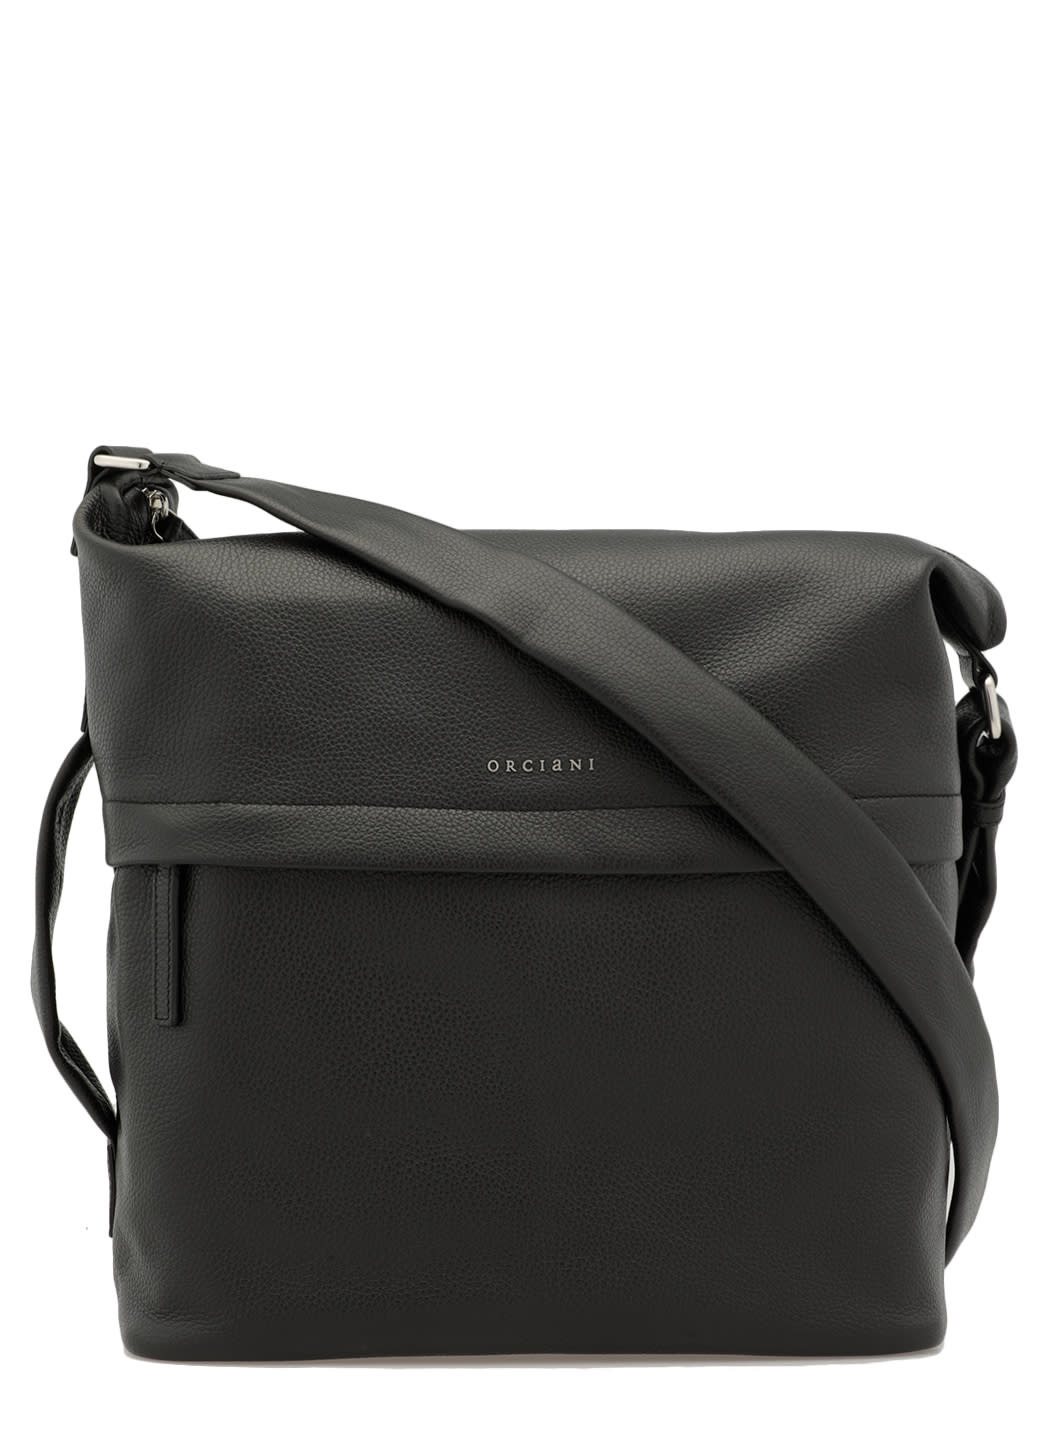 Orciani Pebbled Leather Bag In Black